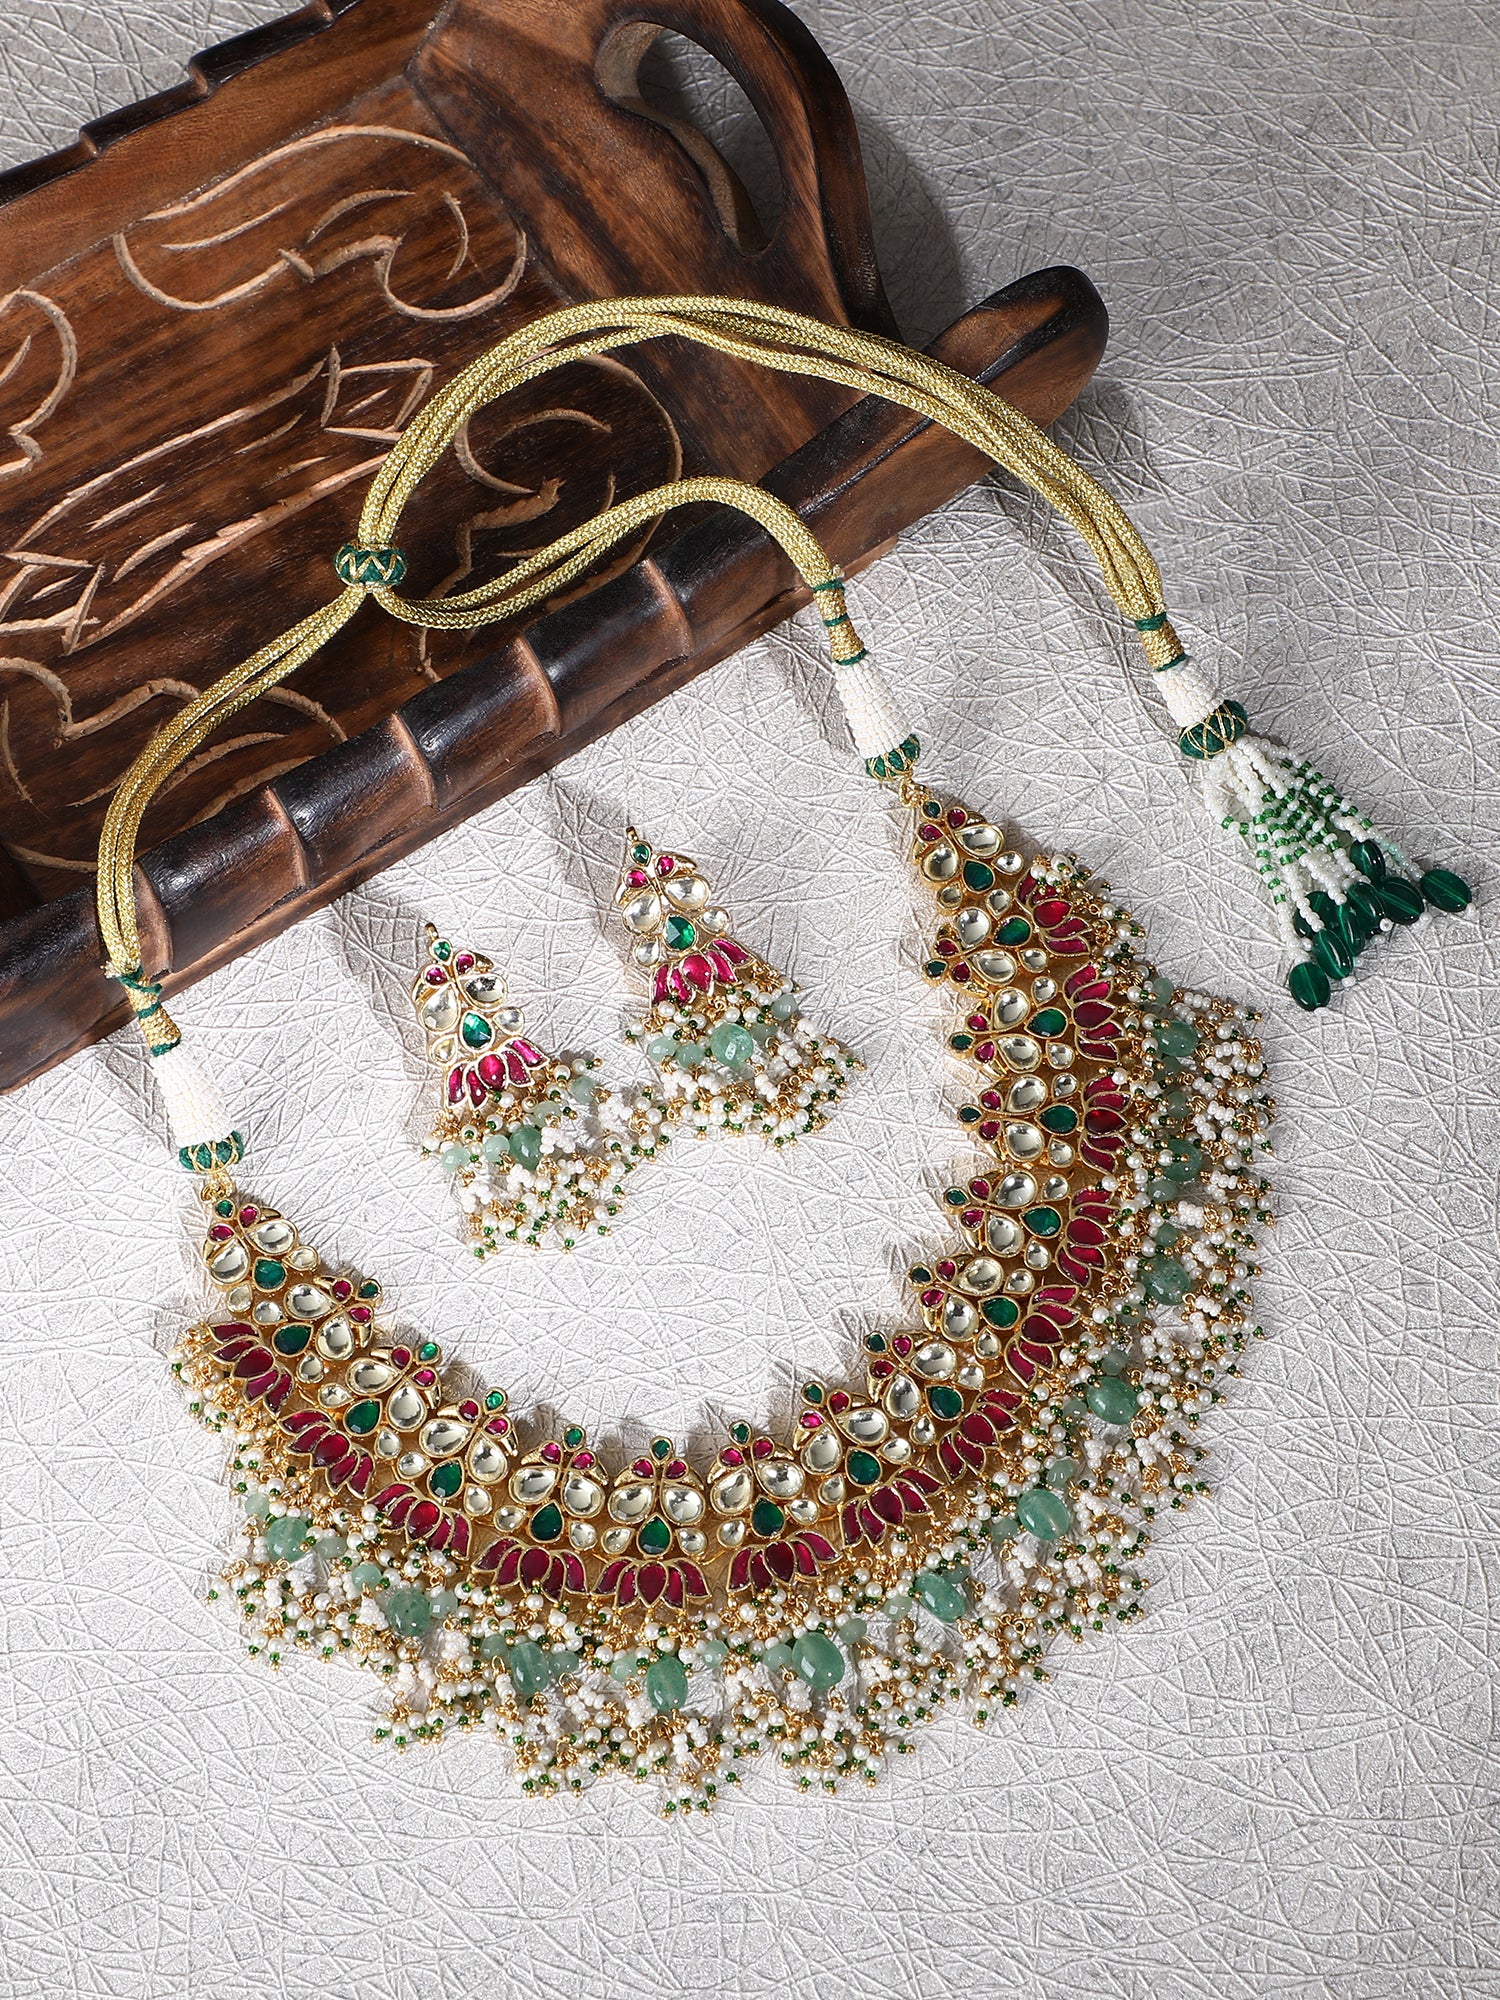 22KT Gold Plated Kundan Red and Green Necklace Set For women and Girls